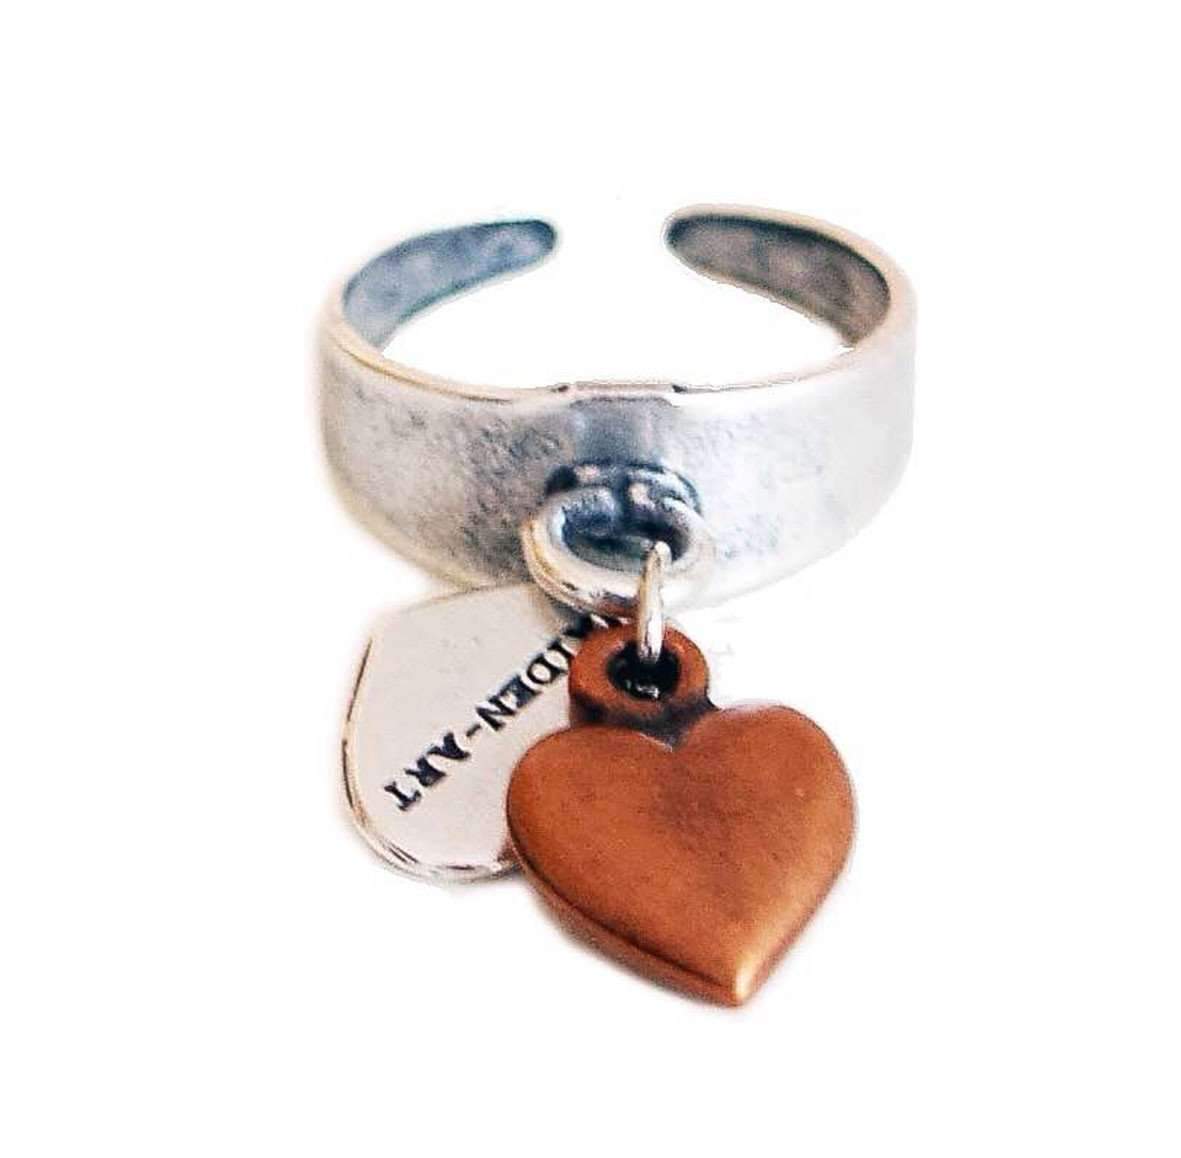 Statement ring in silver with copper heart charm